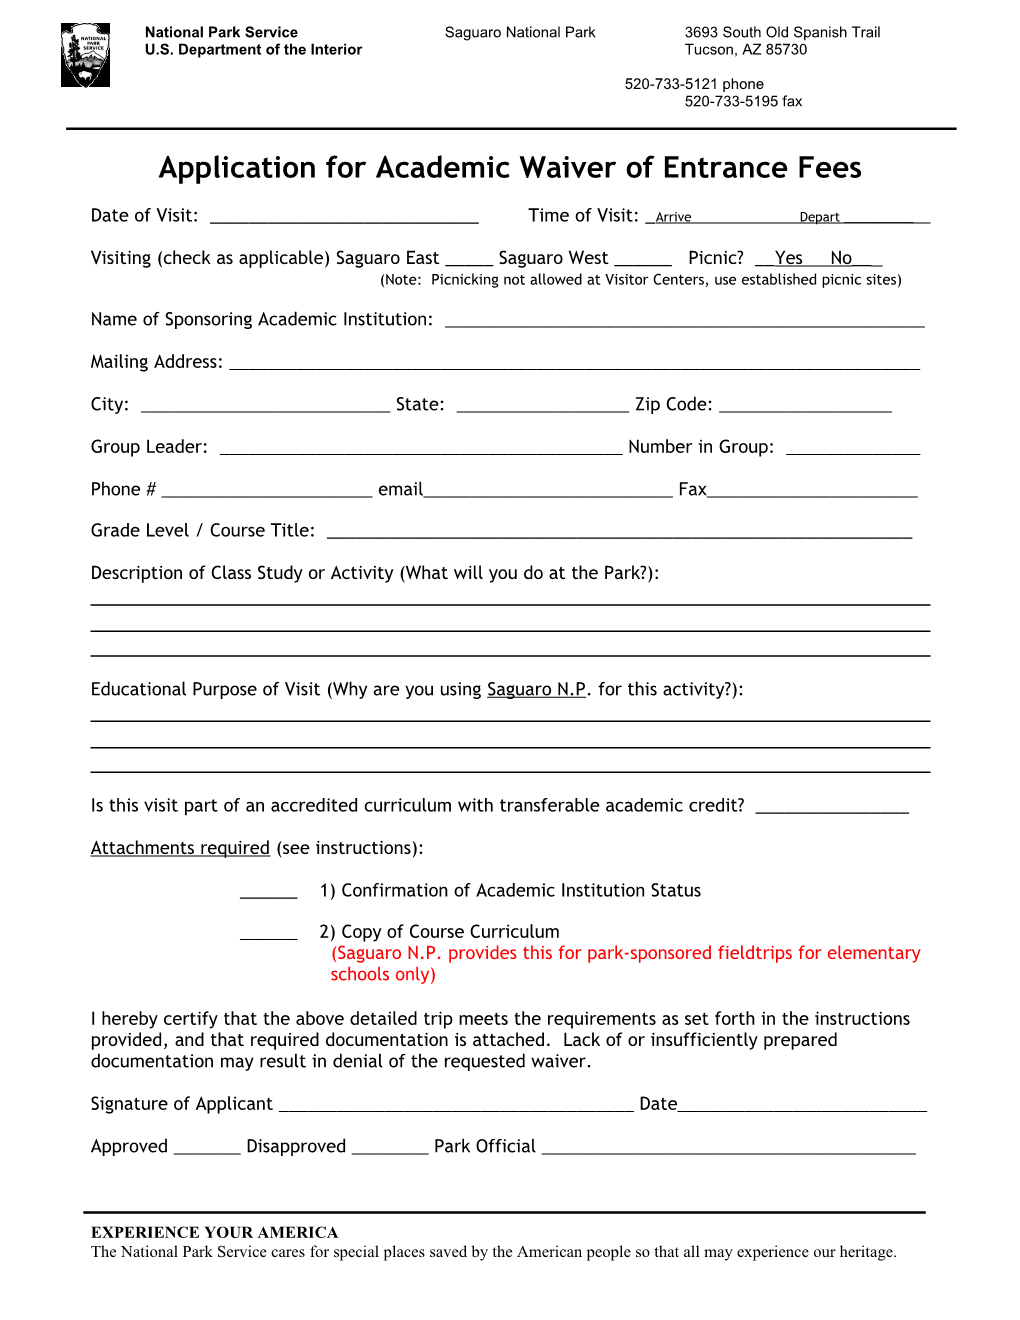 Application for Academic Waiver of Entrance Fees